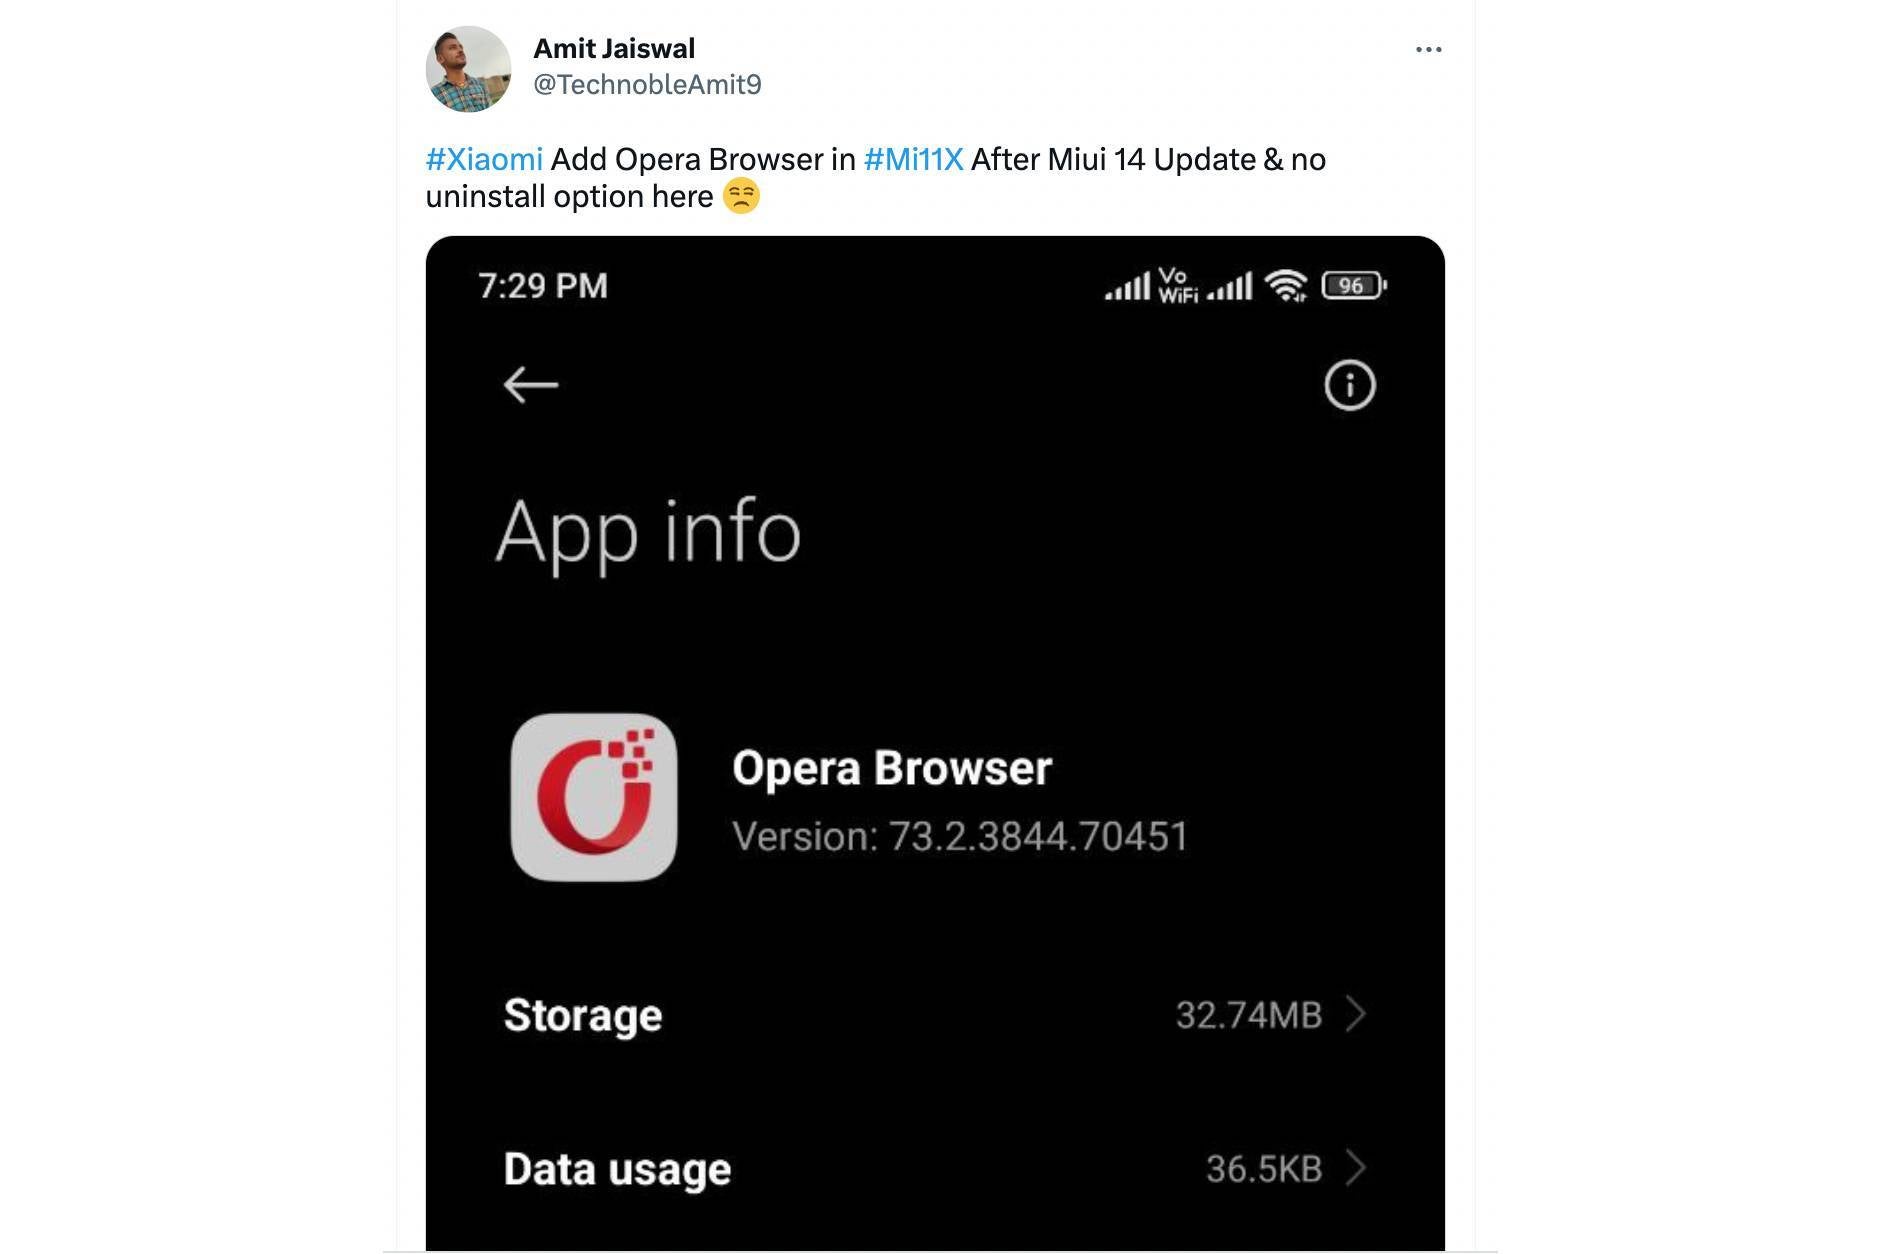 The forcible download of Opera has left some Indian users unhappy - Xiaomi forcibly installs Opera on some phones